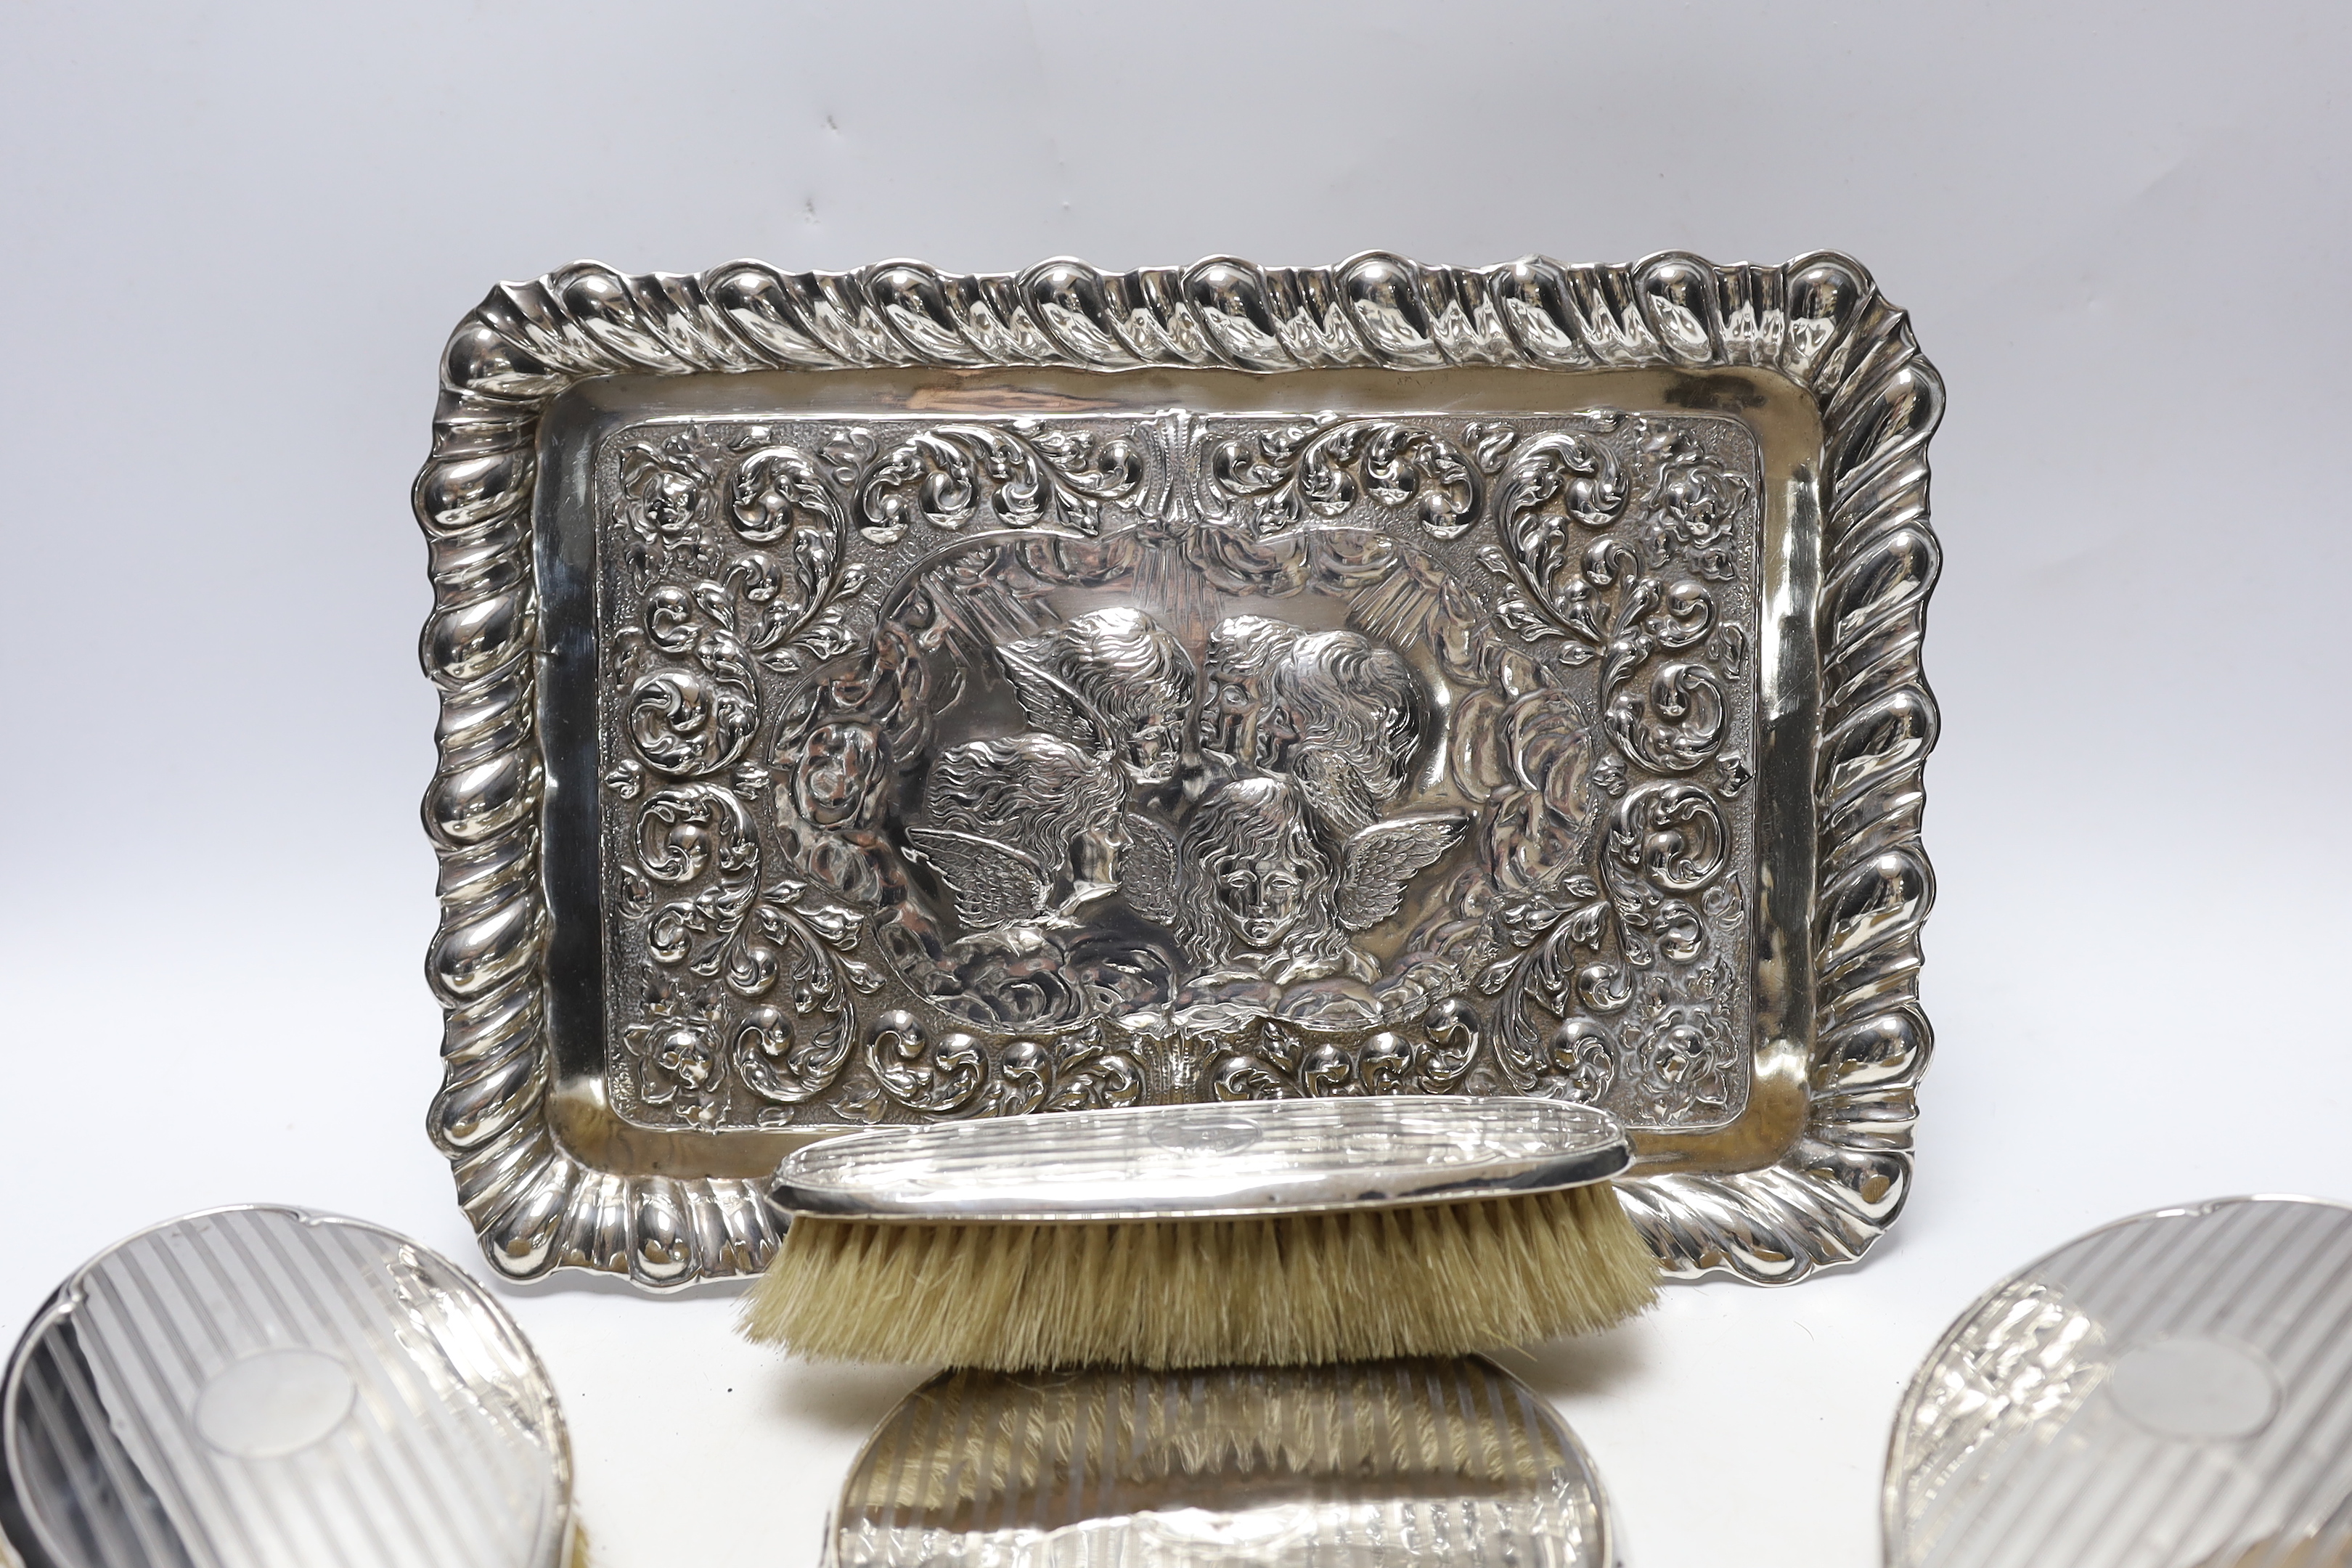 An Edwardian repousse silver dressing table tray, with Reynold's Angels decoration, Birmingham, 1904, 29.7cm, a silver dressing table mirror, two brushes, a clothes brush and two napkin rings.